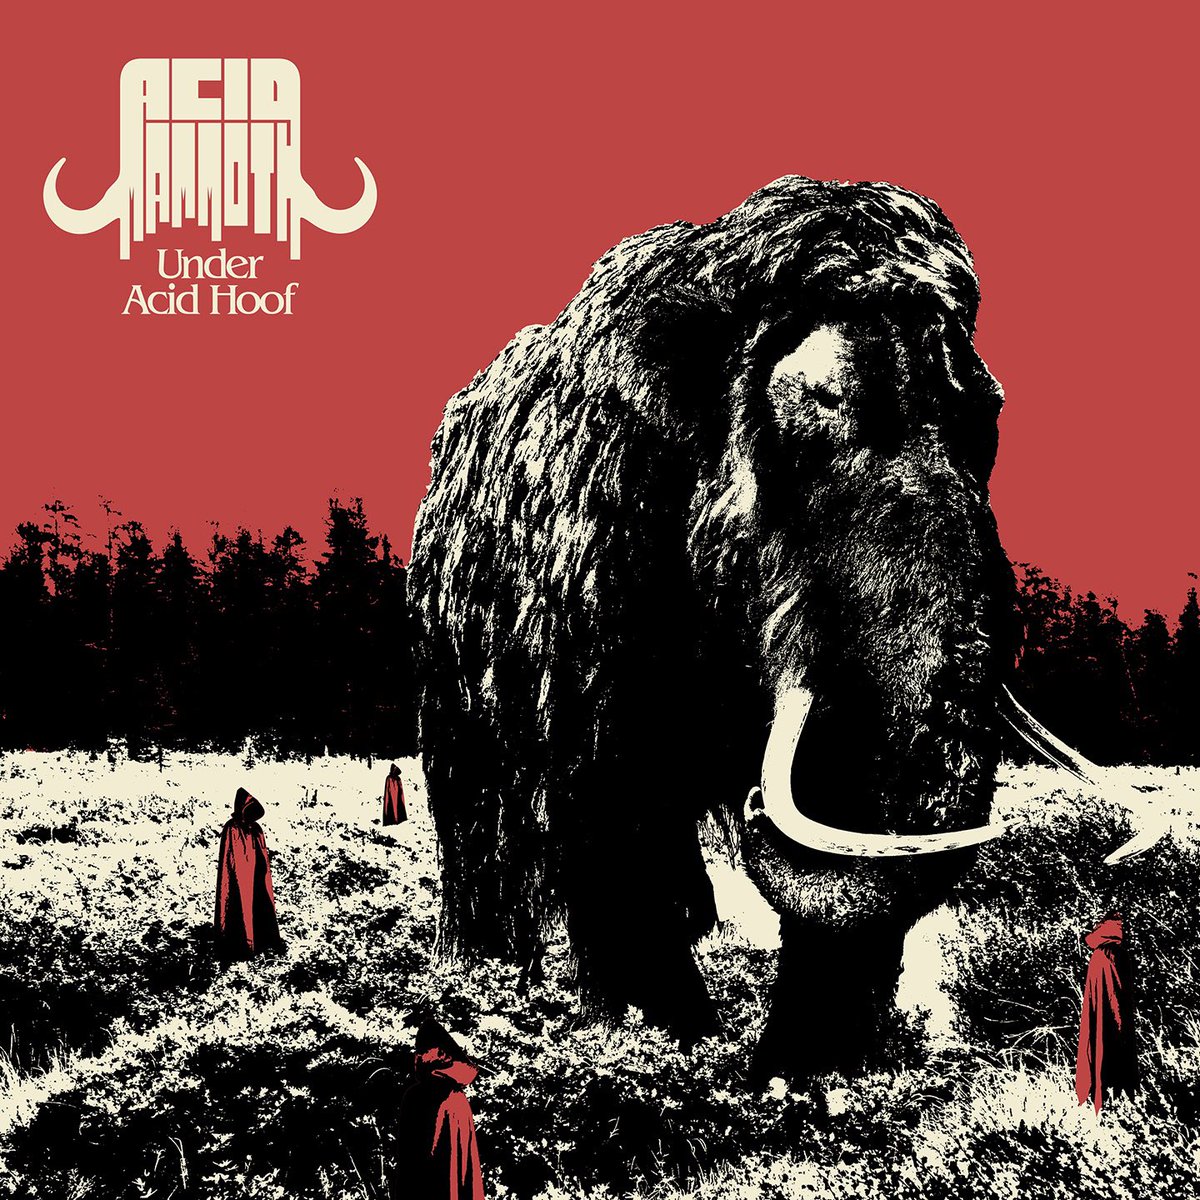 Big crushing slabs of Greek doom with riffs a plenty! Going with Jack The Riffer for #albumcoveraday  #AcidMammoth 🦣🦣🦣